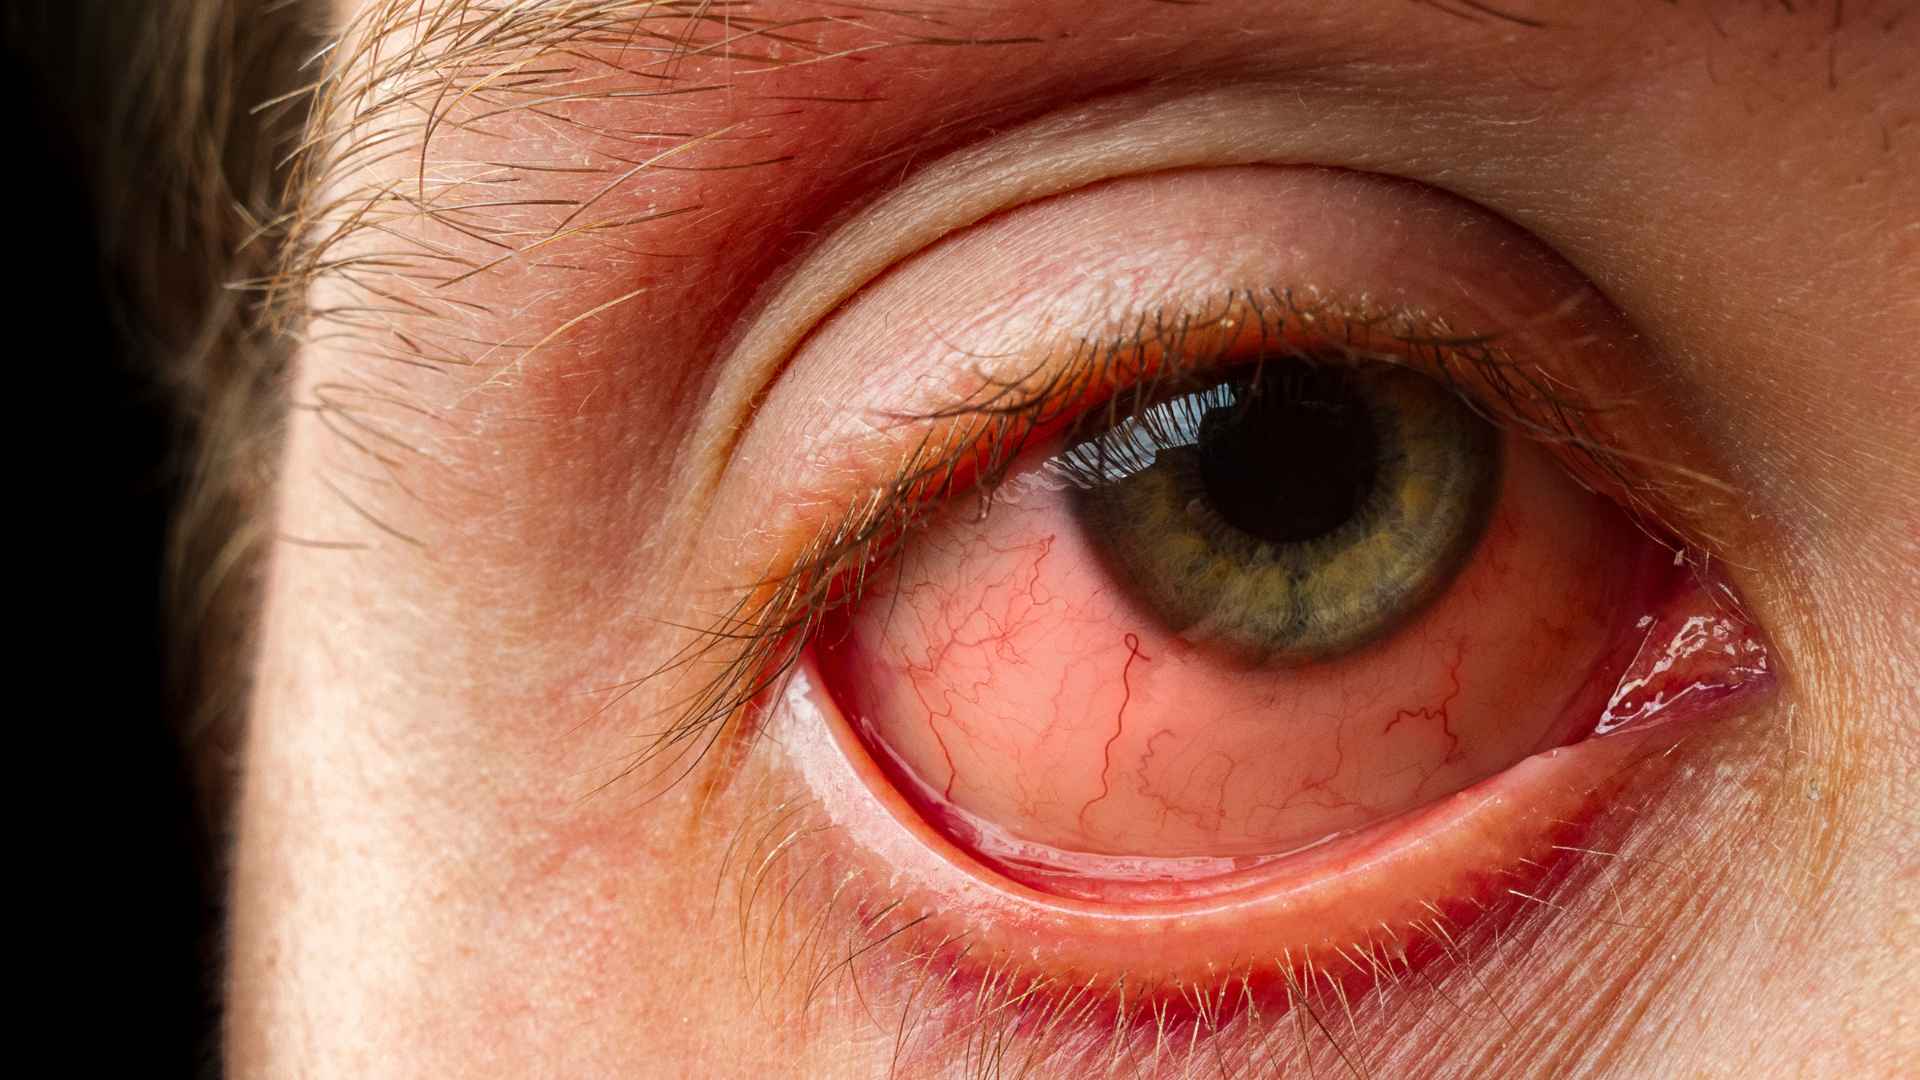 Conjunctivitis can cause a painful itchy and red eye.